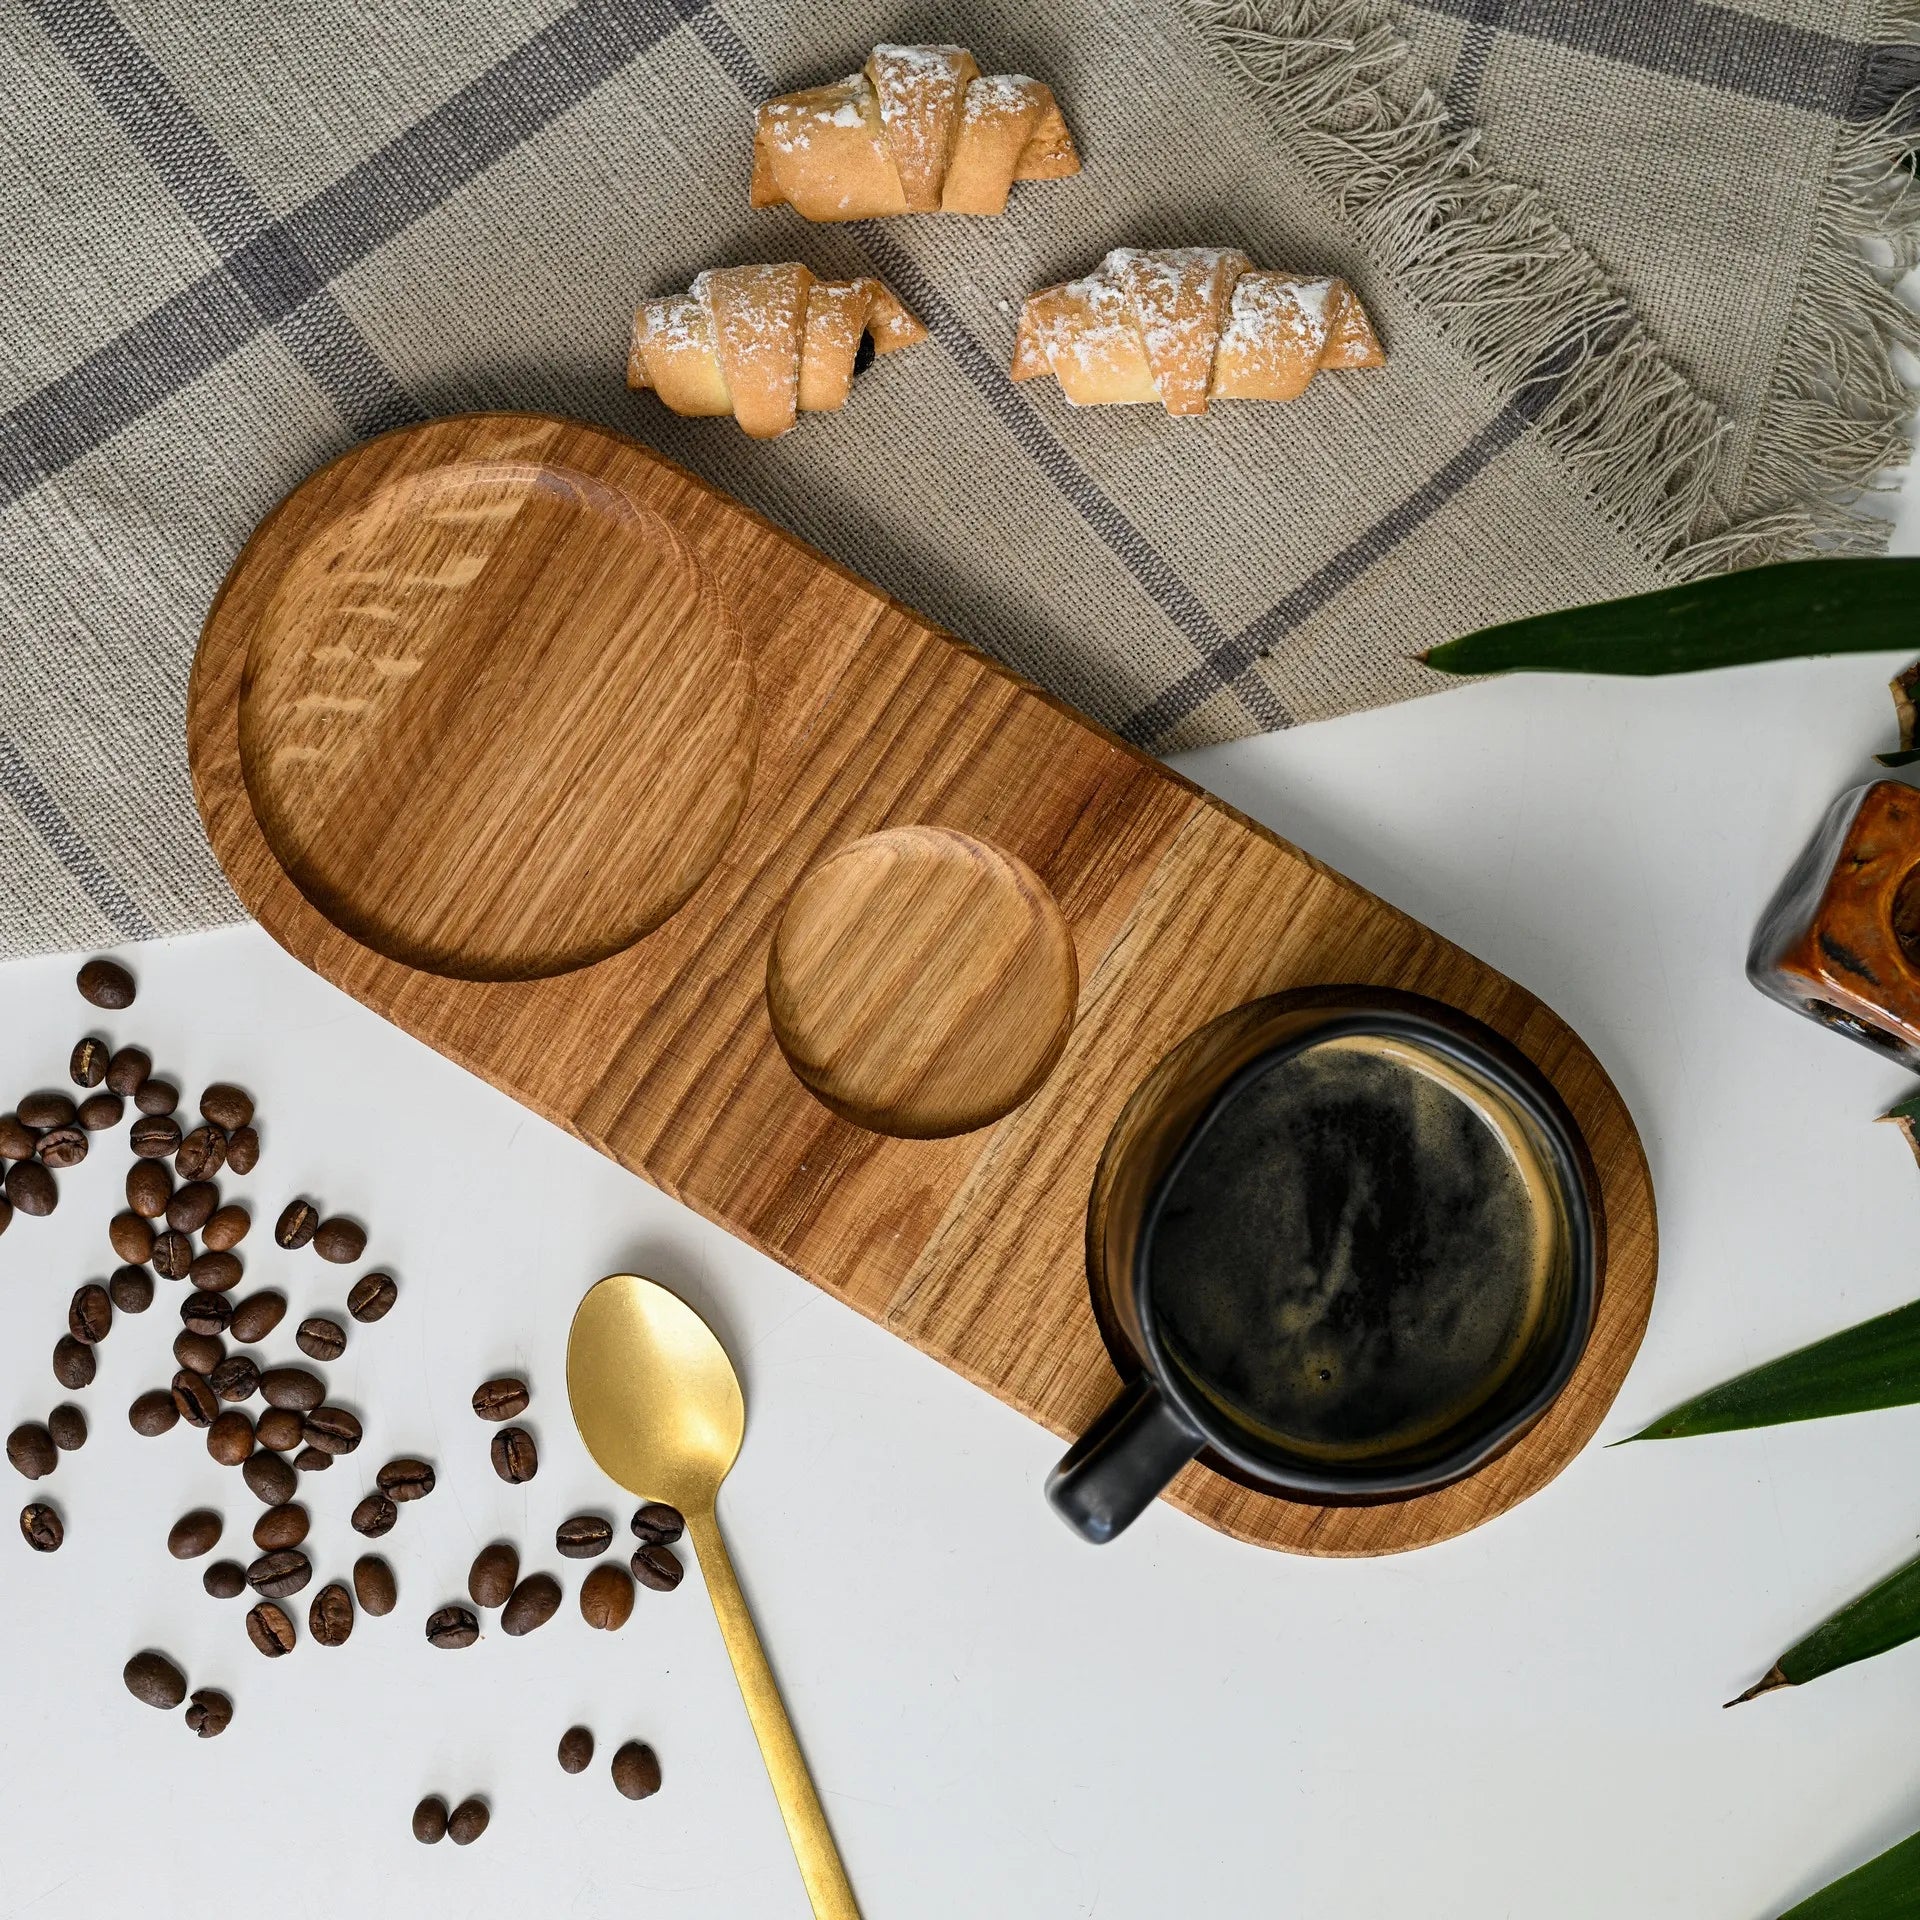 Custom wooden serving tray for cafes, personalized with your logo or design, enhancing the dining experience.